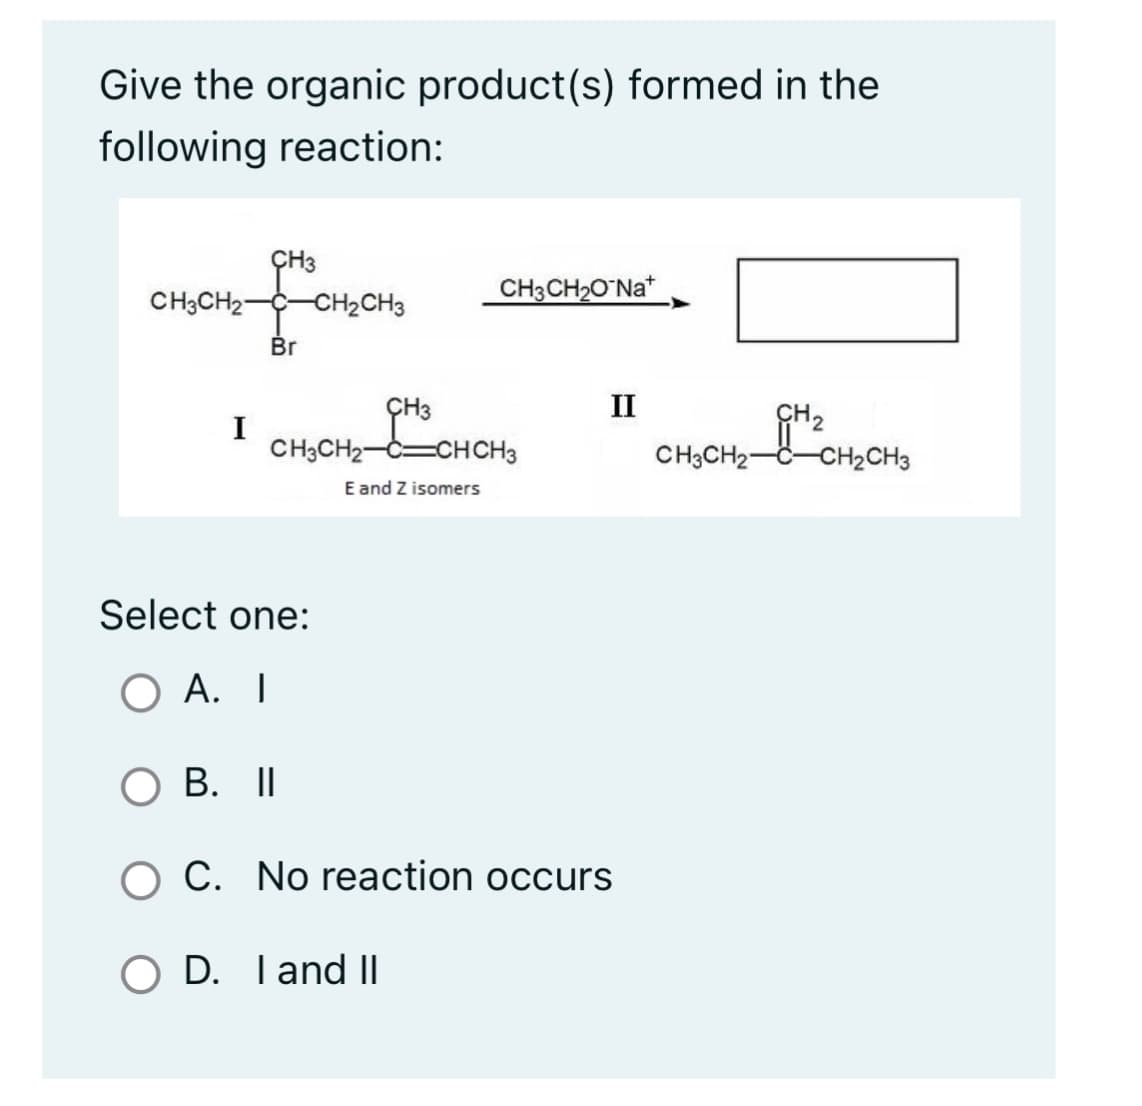 Give the organic product(s) formed in the
following reaction:
CH3CH2-
for
Br
I
Select one:
A. I
H₂CH3
CH3
CH3CH2 C CHCH3
E and Z isomers
O B. II
CH3CH₂O Na+
OD. I and II
II
C. No reaction occurs
CH3CH₂
GH₂
-CH₂CH3